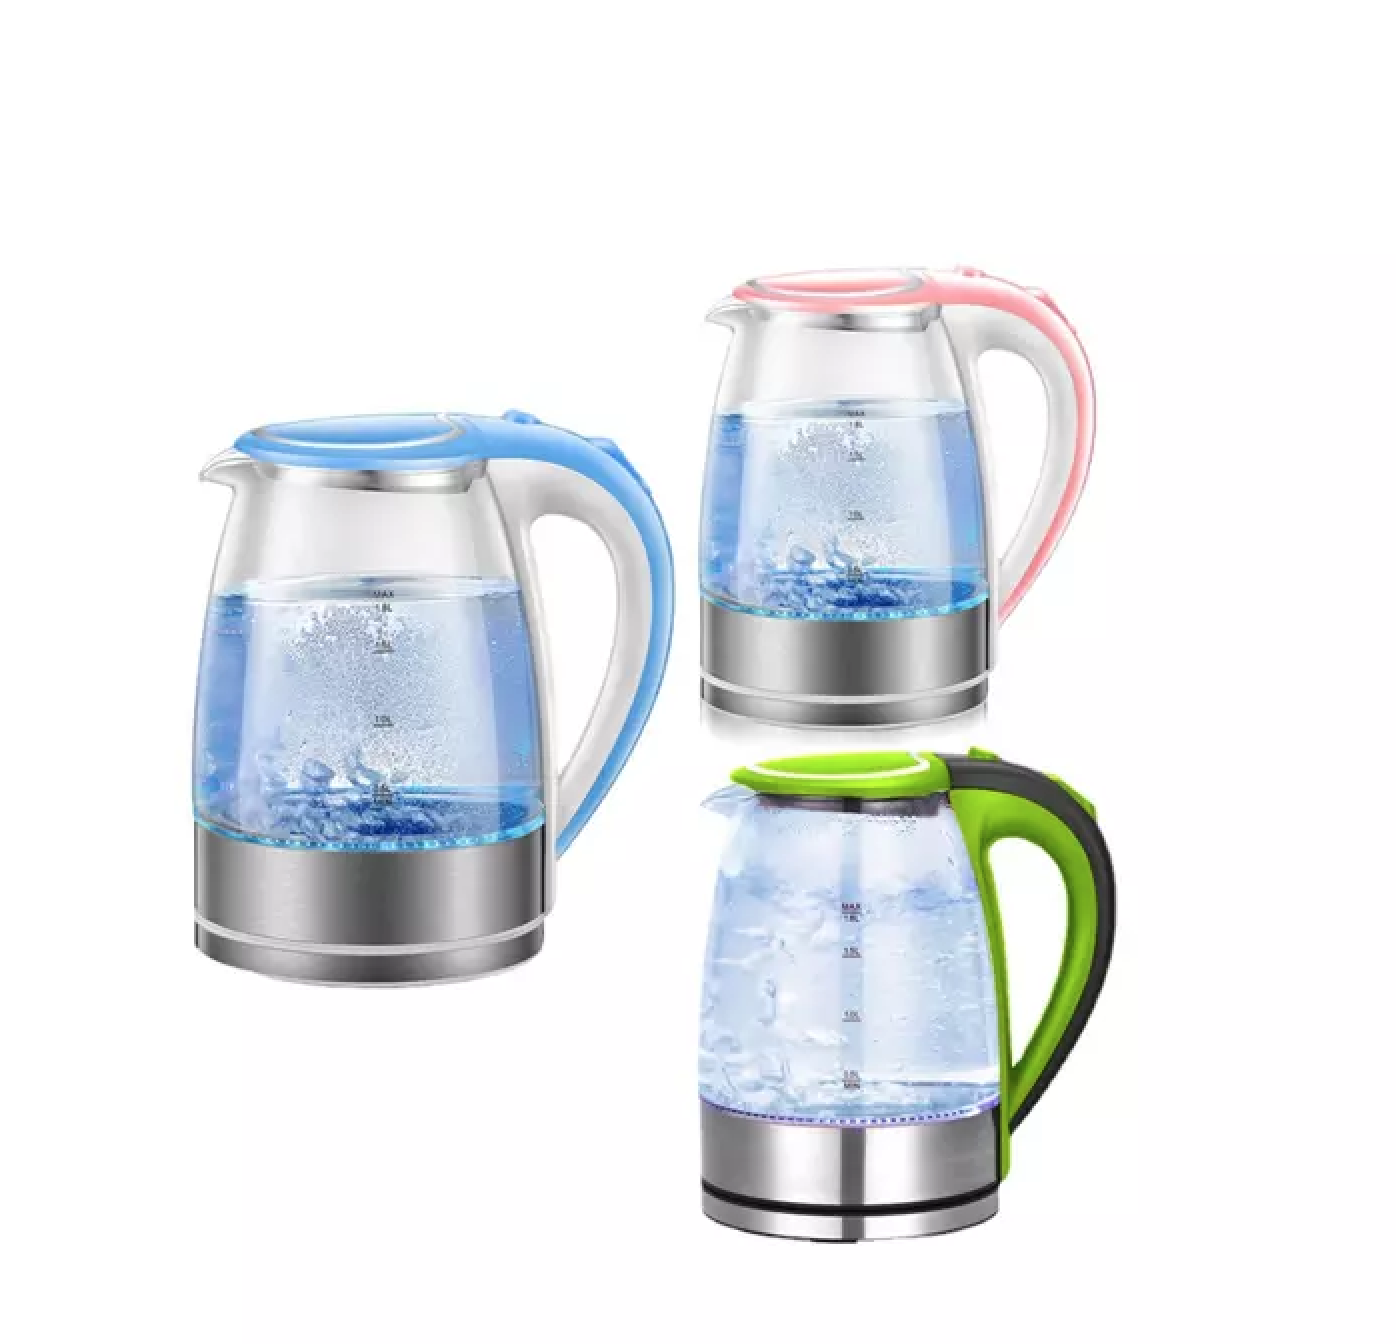 Water Kettle Led Indicator 1.7 L Glass Water Boiler